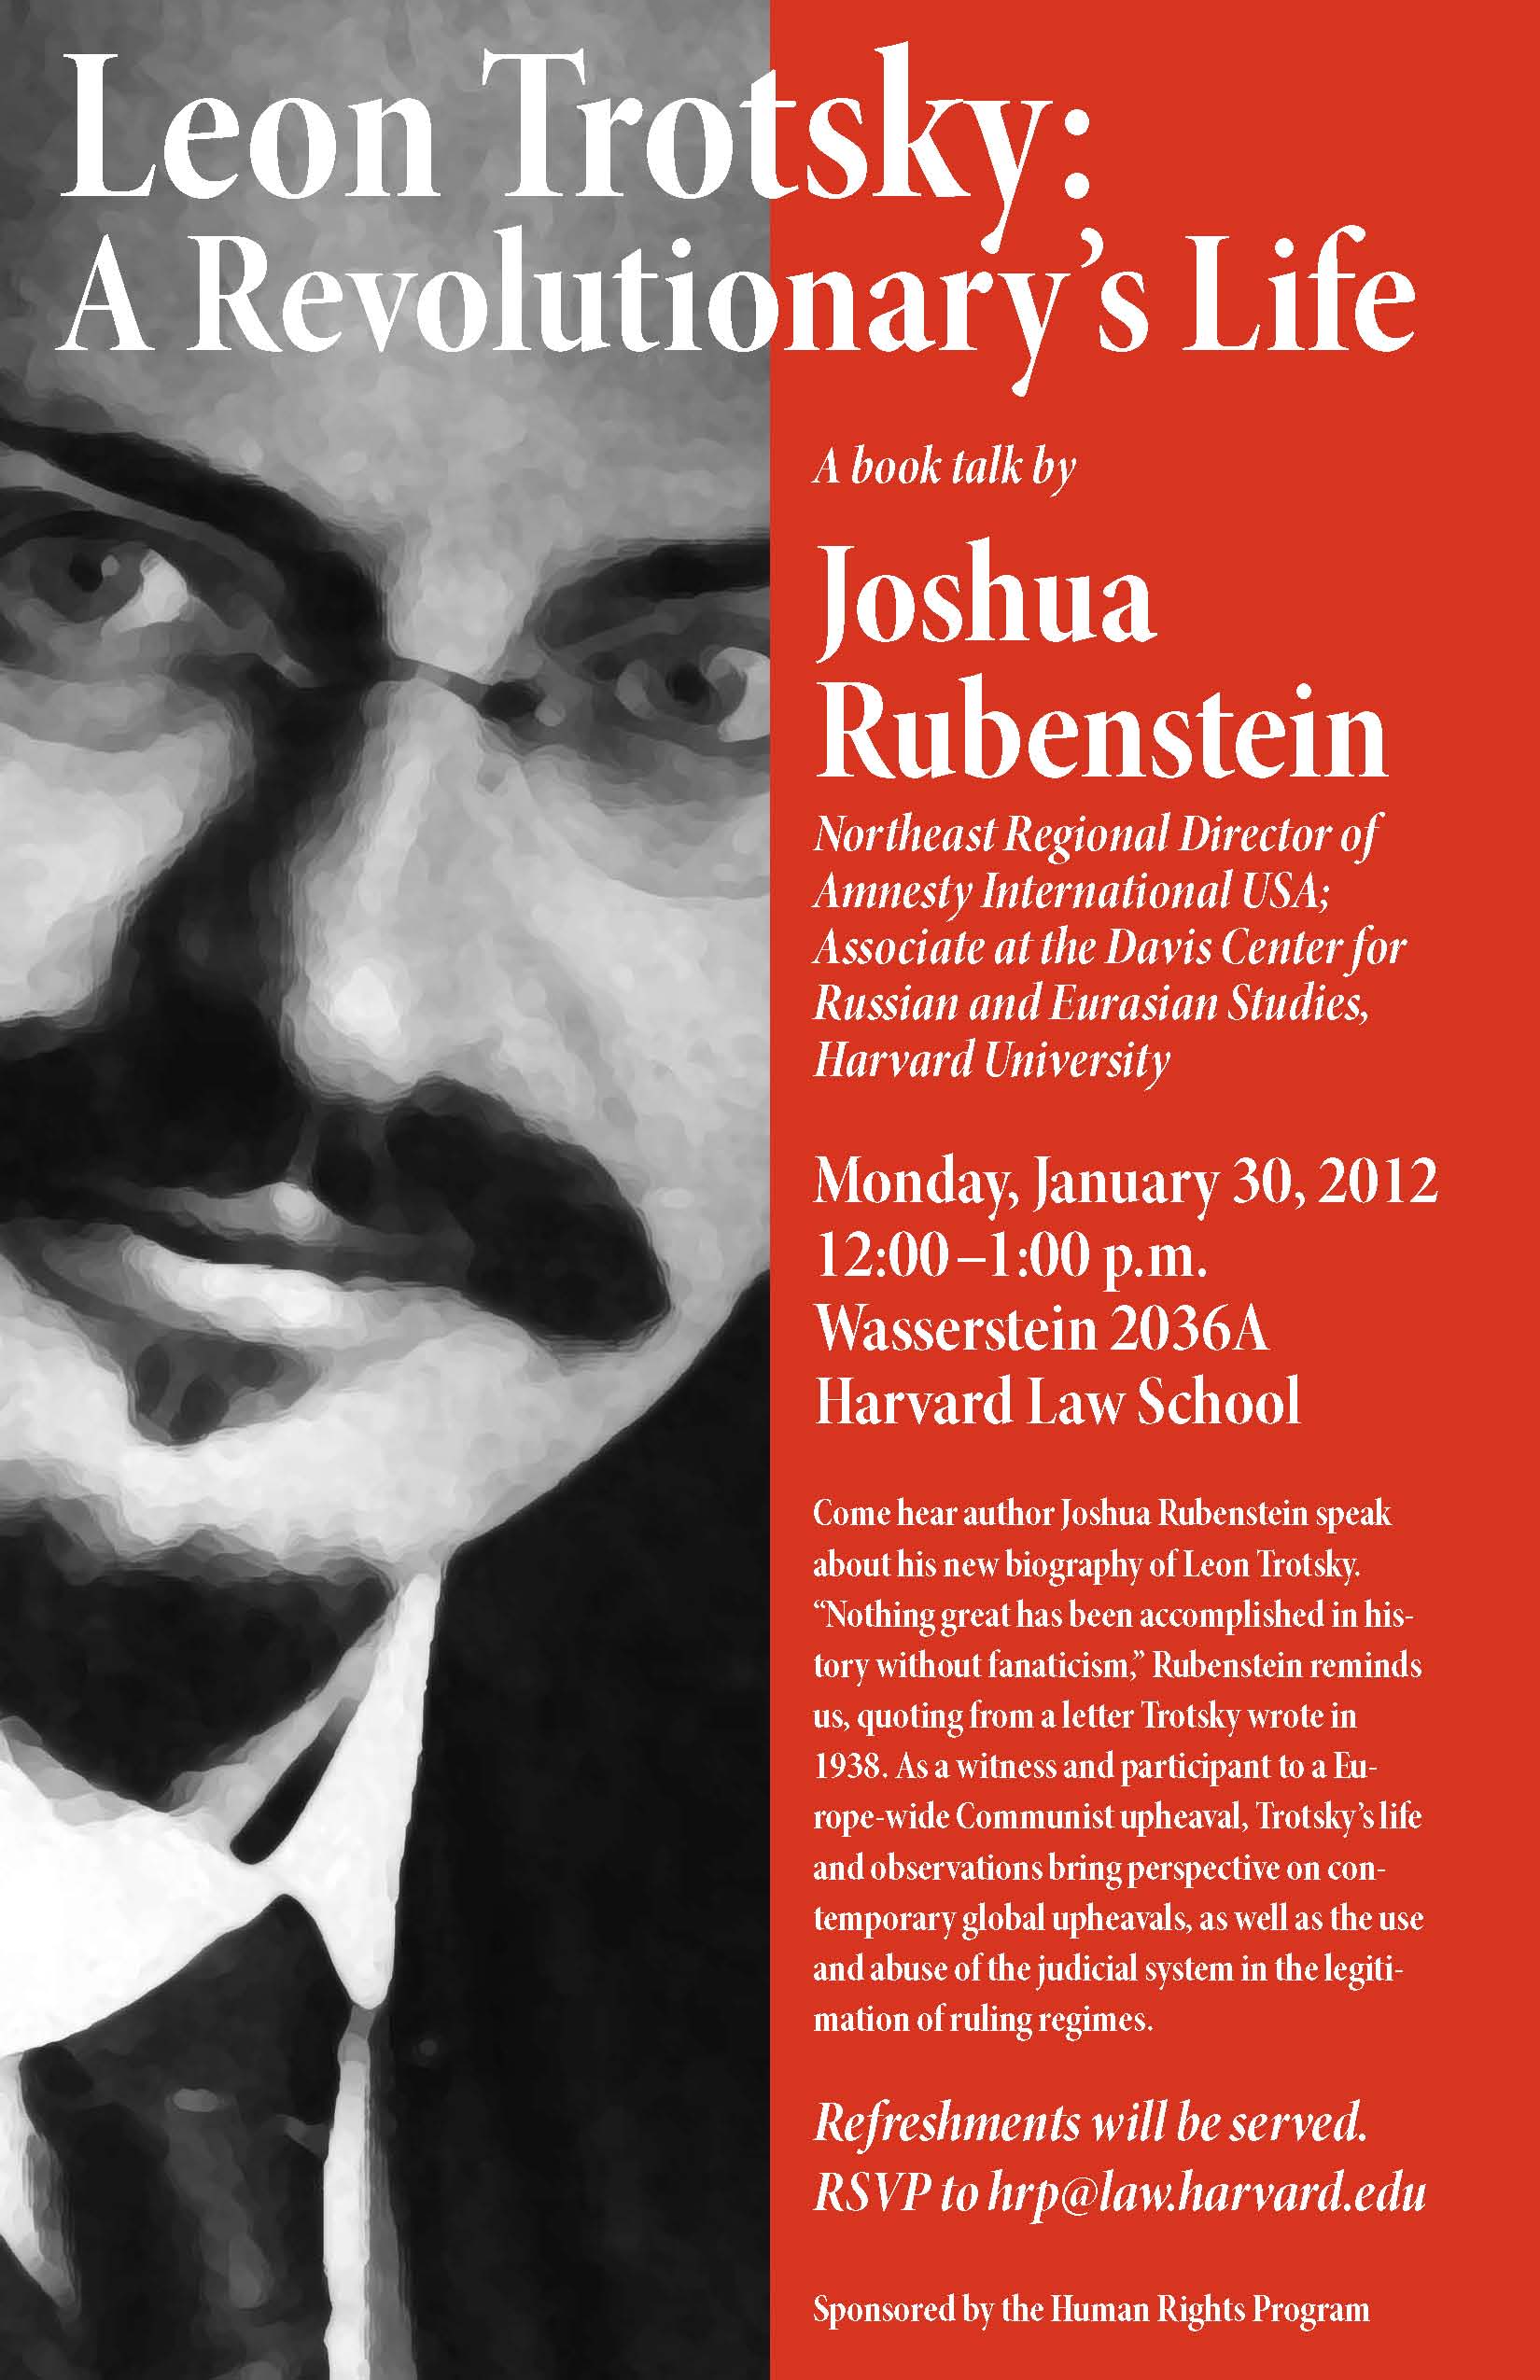 Poster for event, Leon Trotsky: A Revolutionary's Life, by Joshua Rubenstein, depicts half of Trotsky's face next to text describing the event.